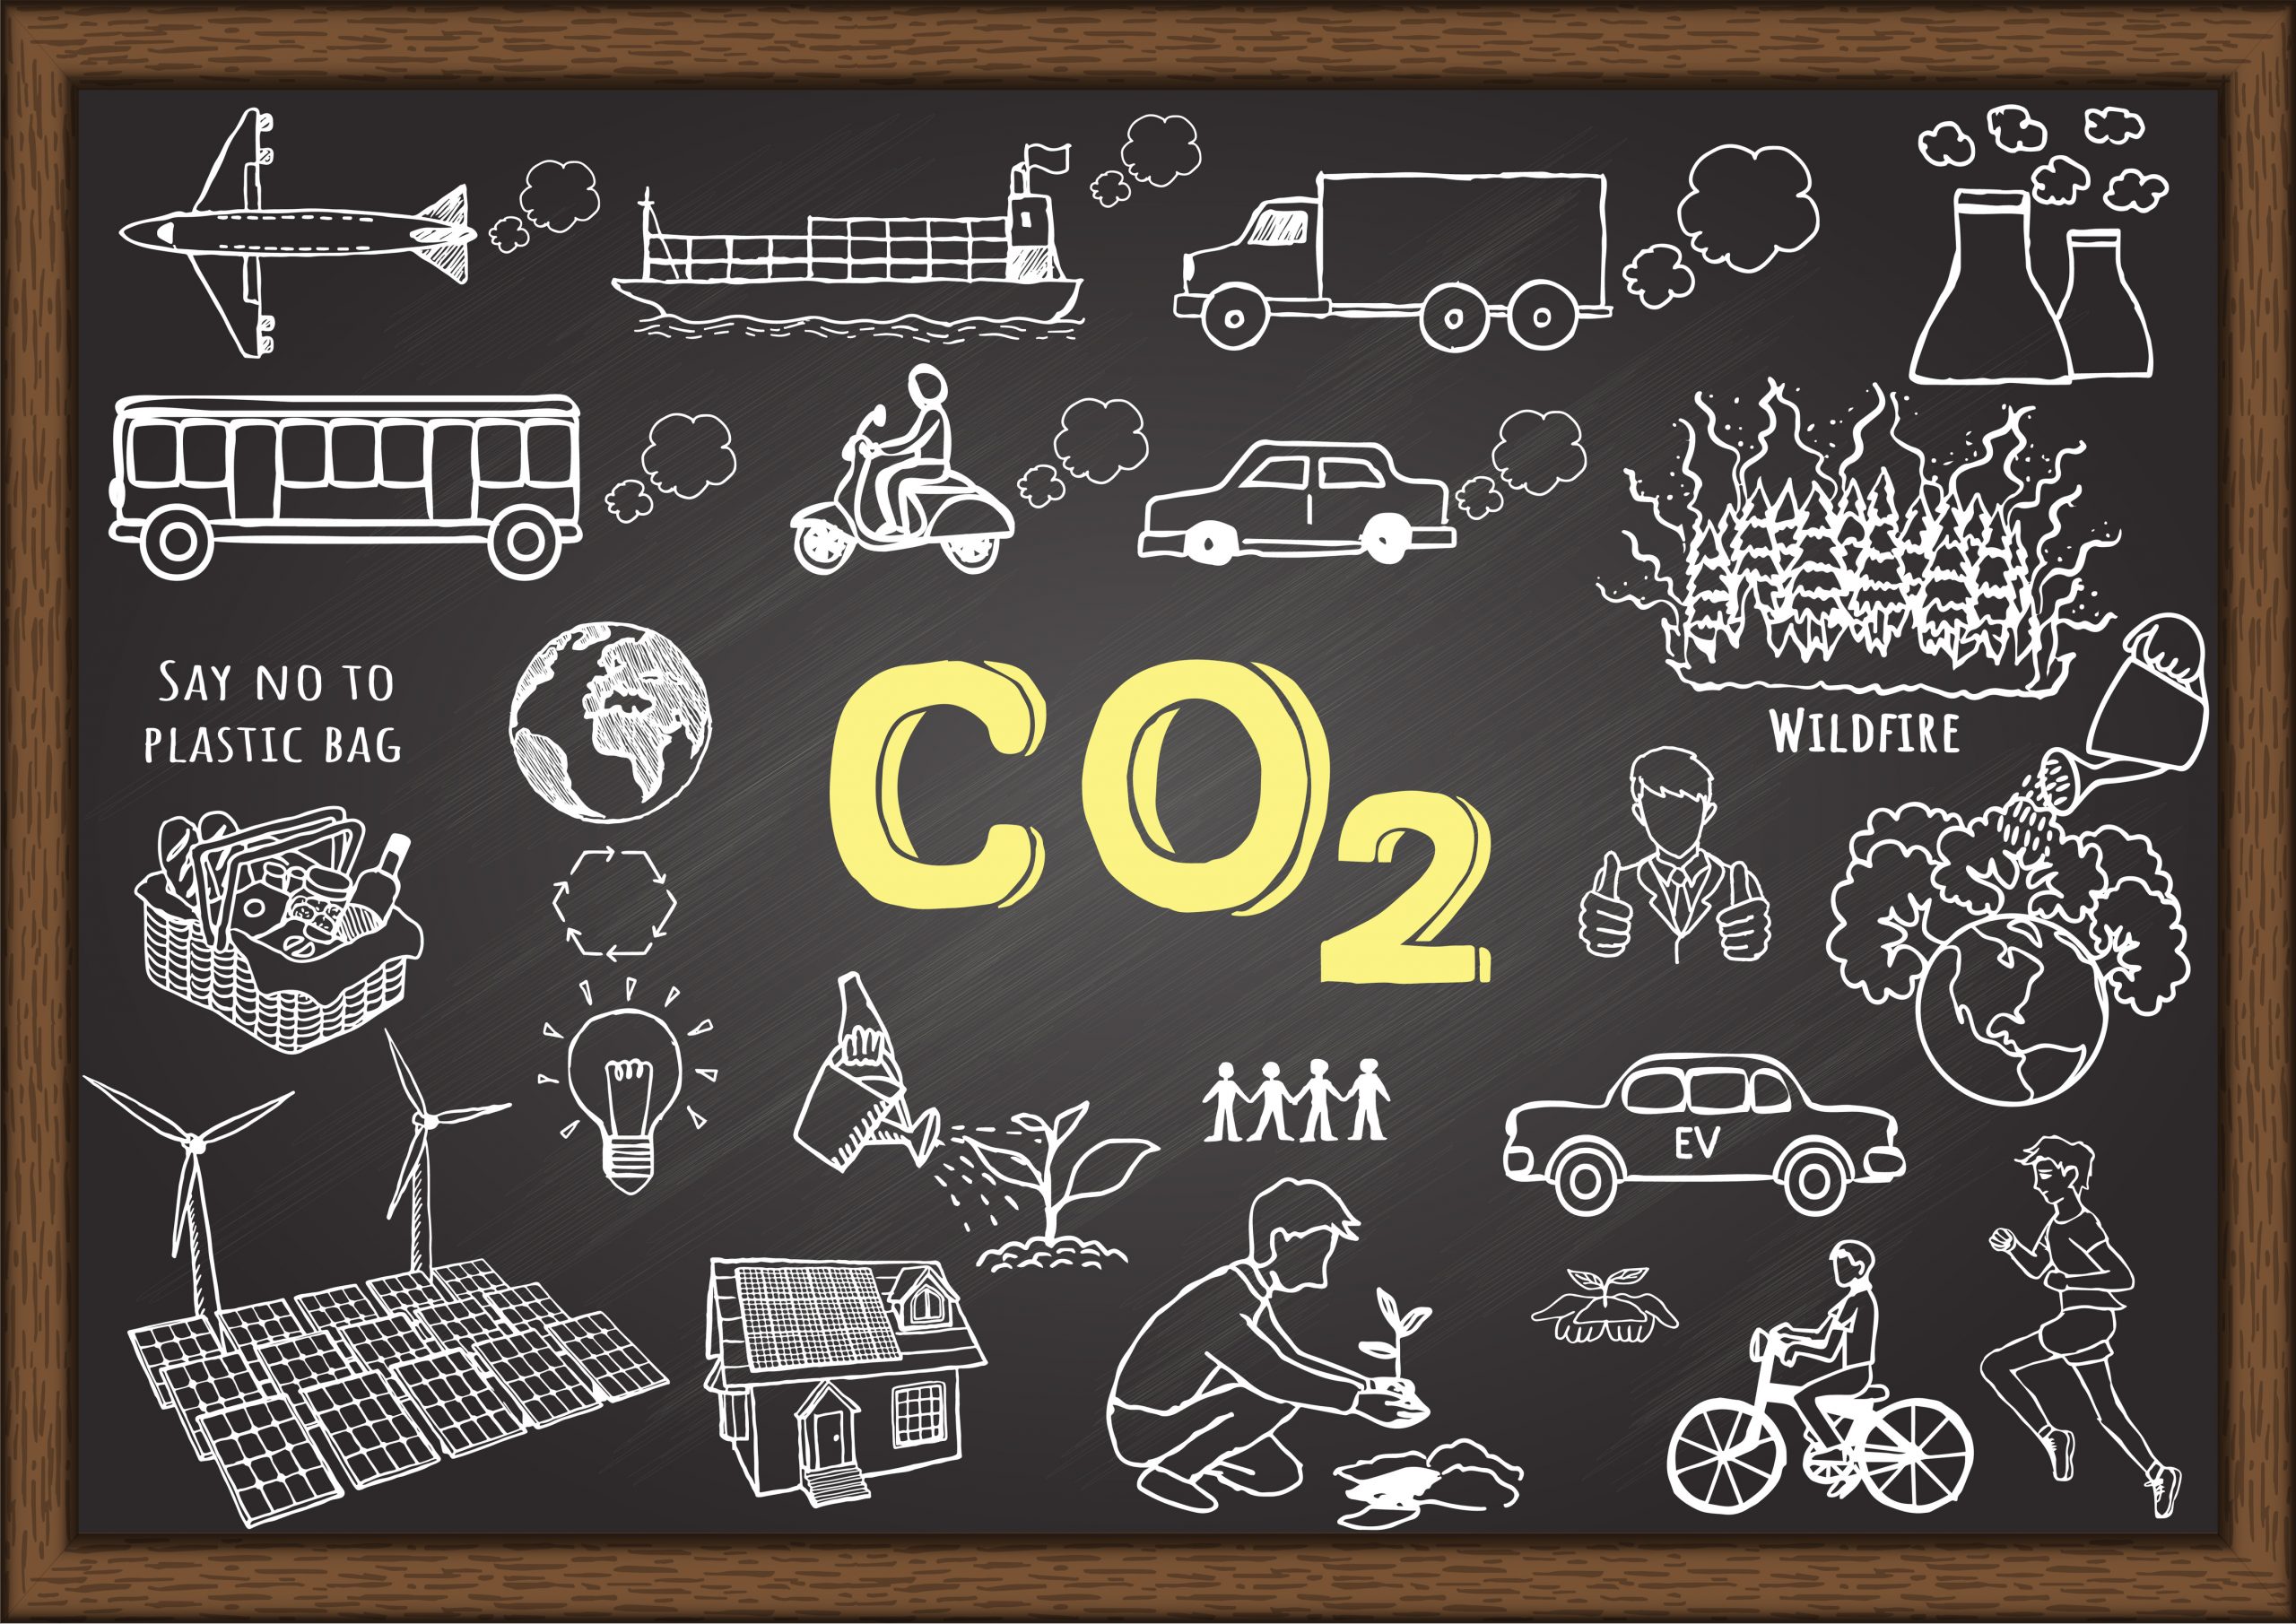 Separation and Capture of CO2 Toward Carbon Neutrality